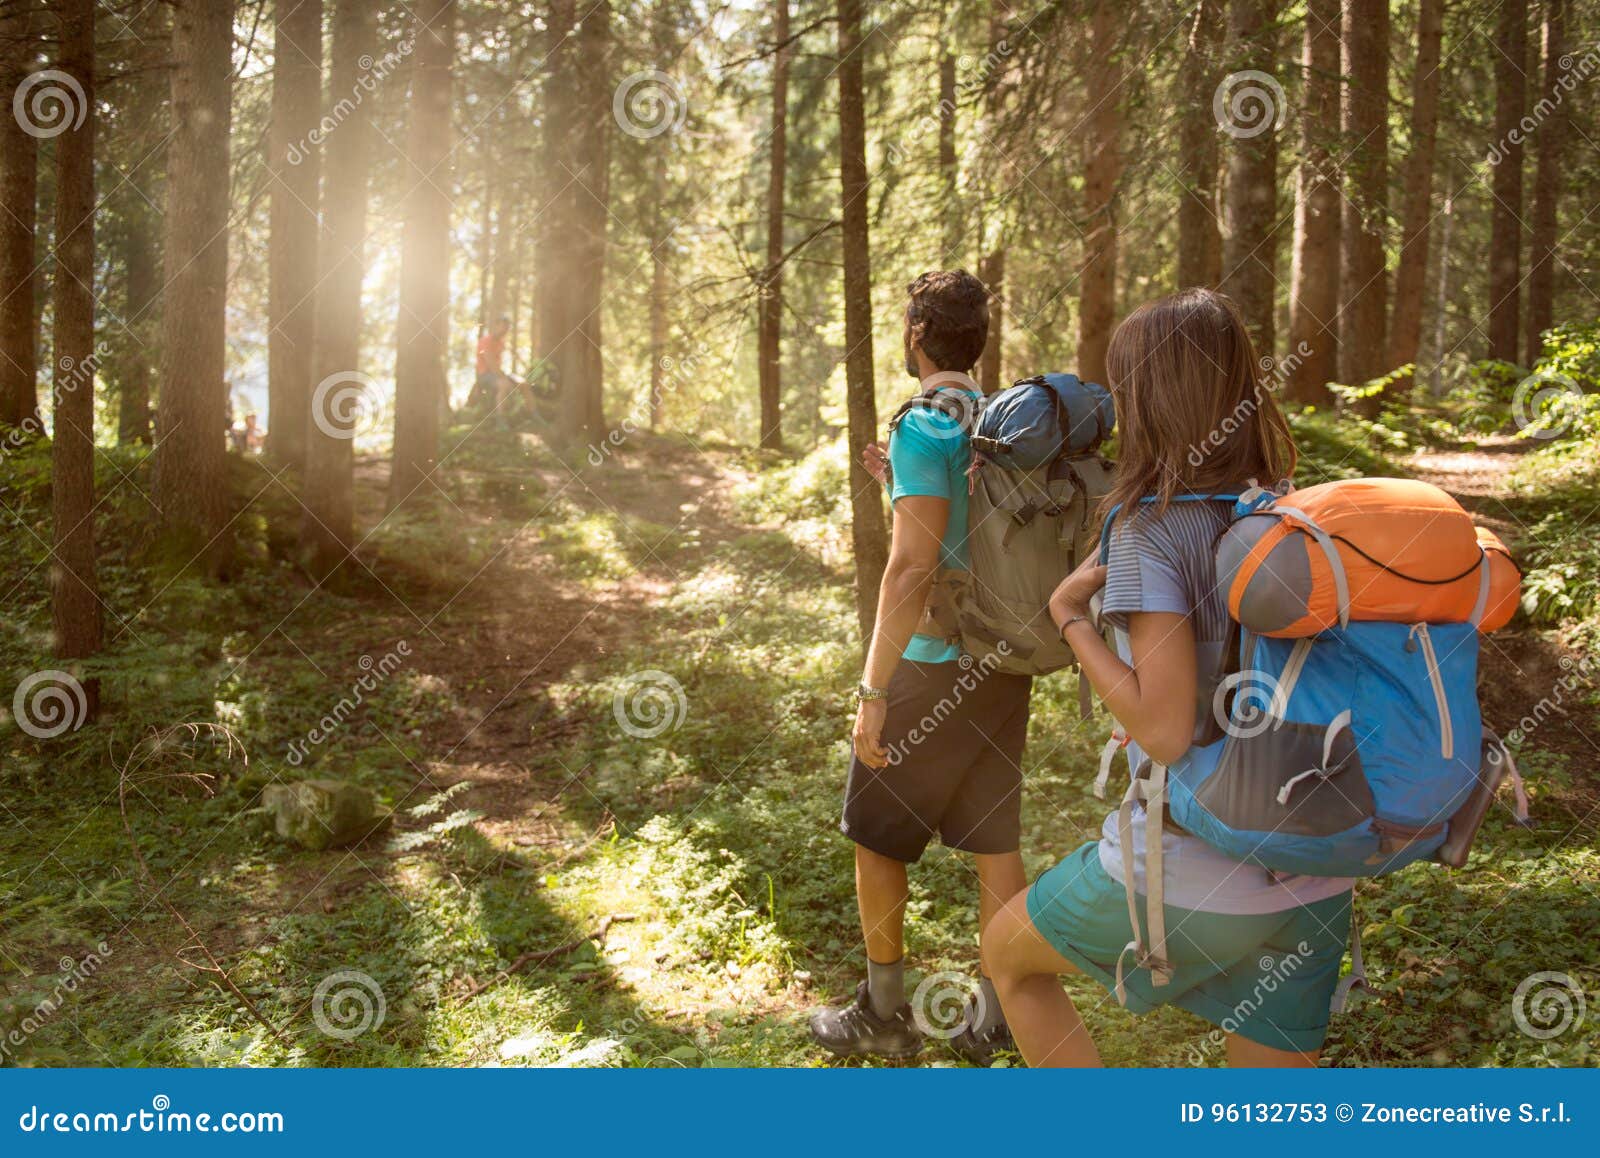 man and woman with backpack walking on hiking trail path in forest woods during sunny day.group of friends people summer